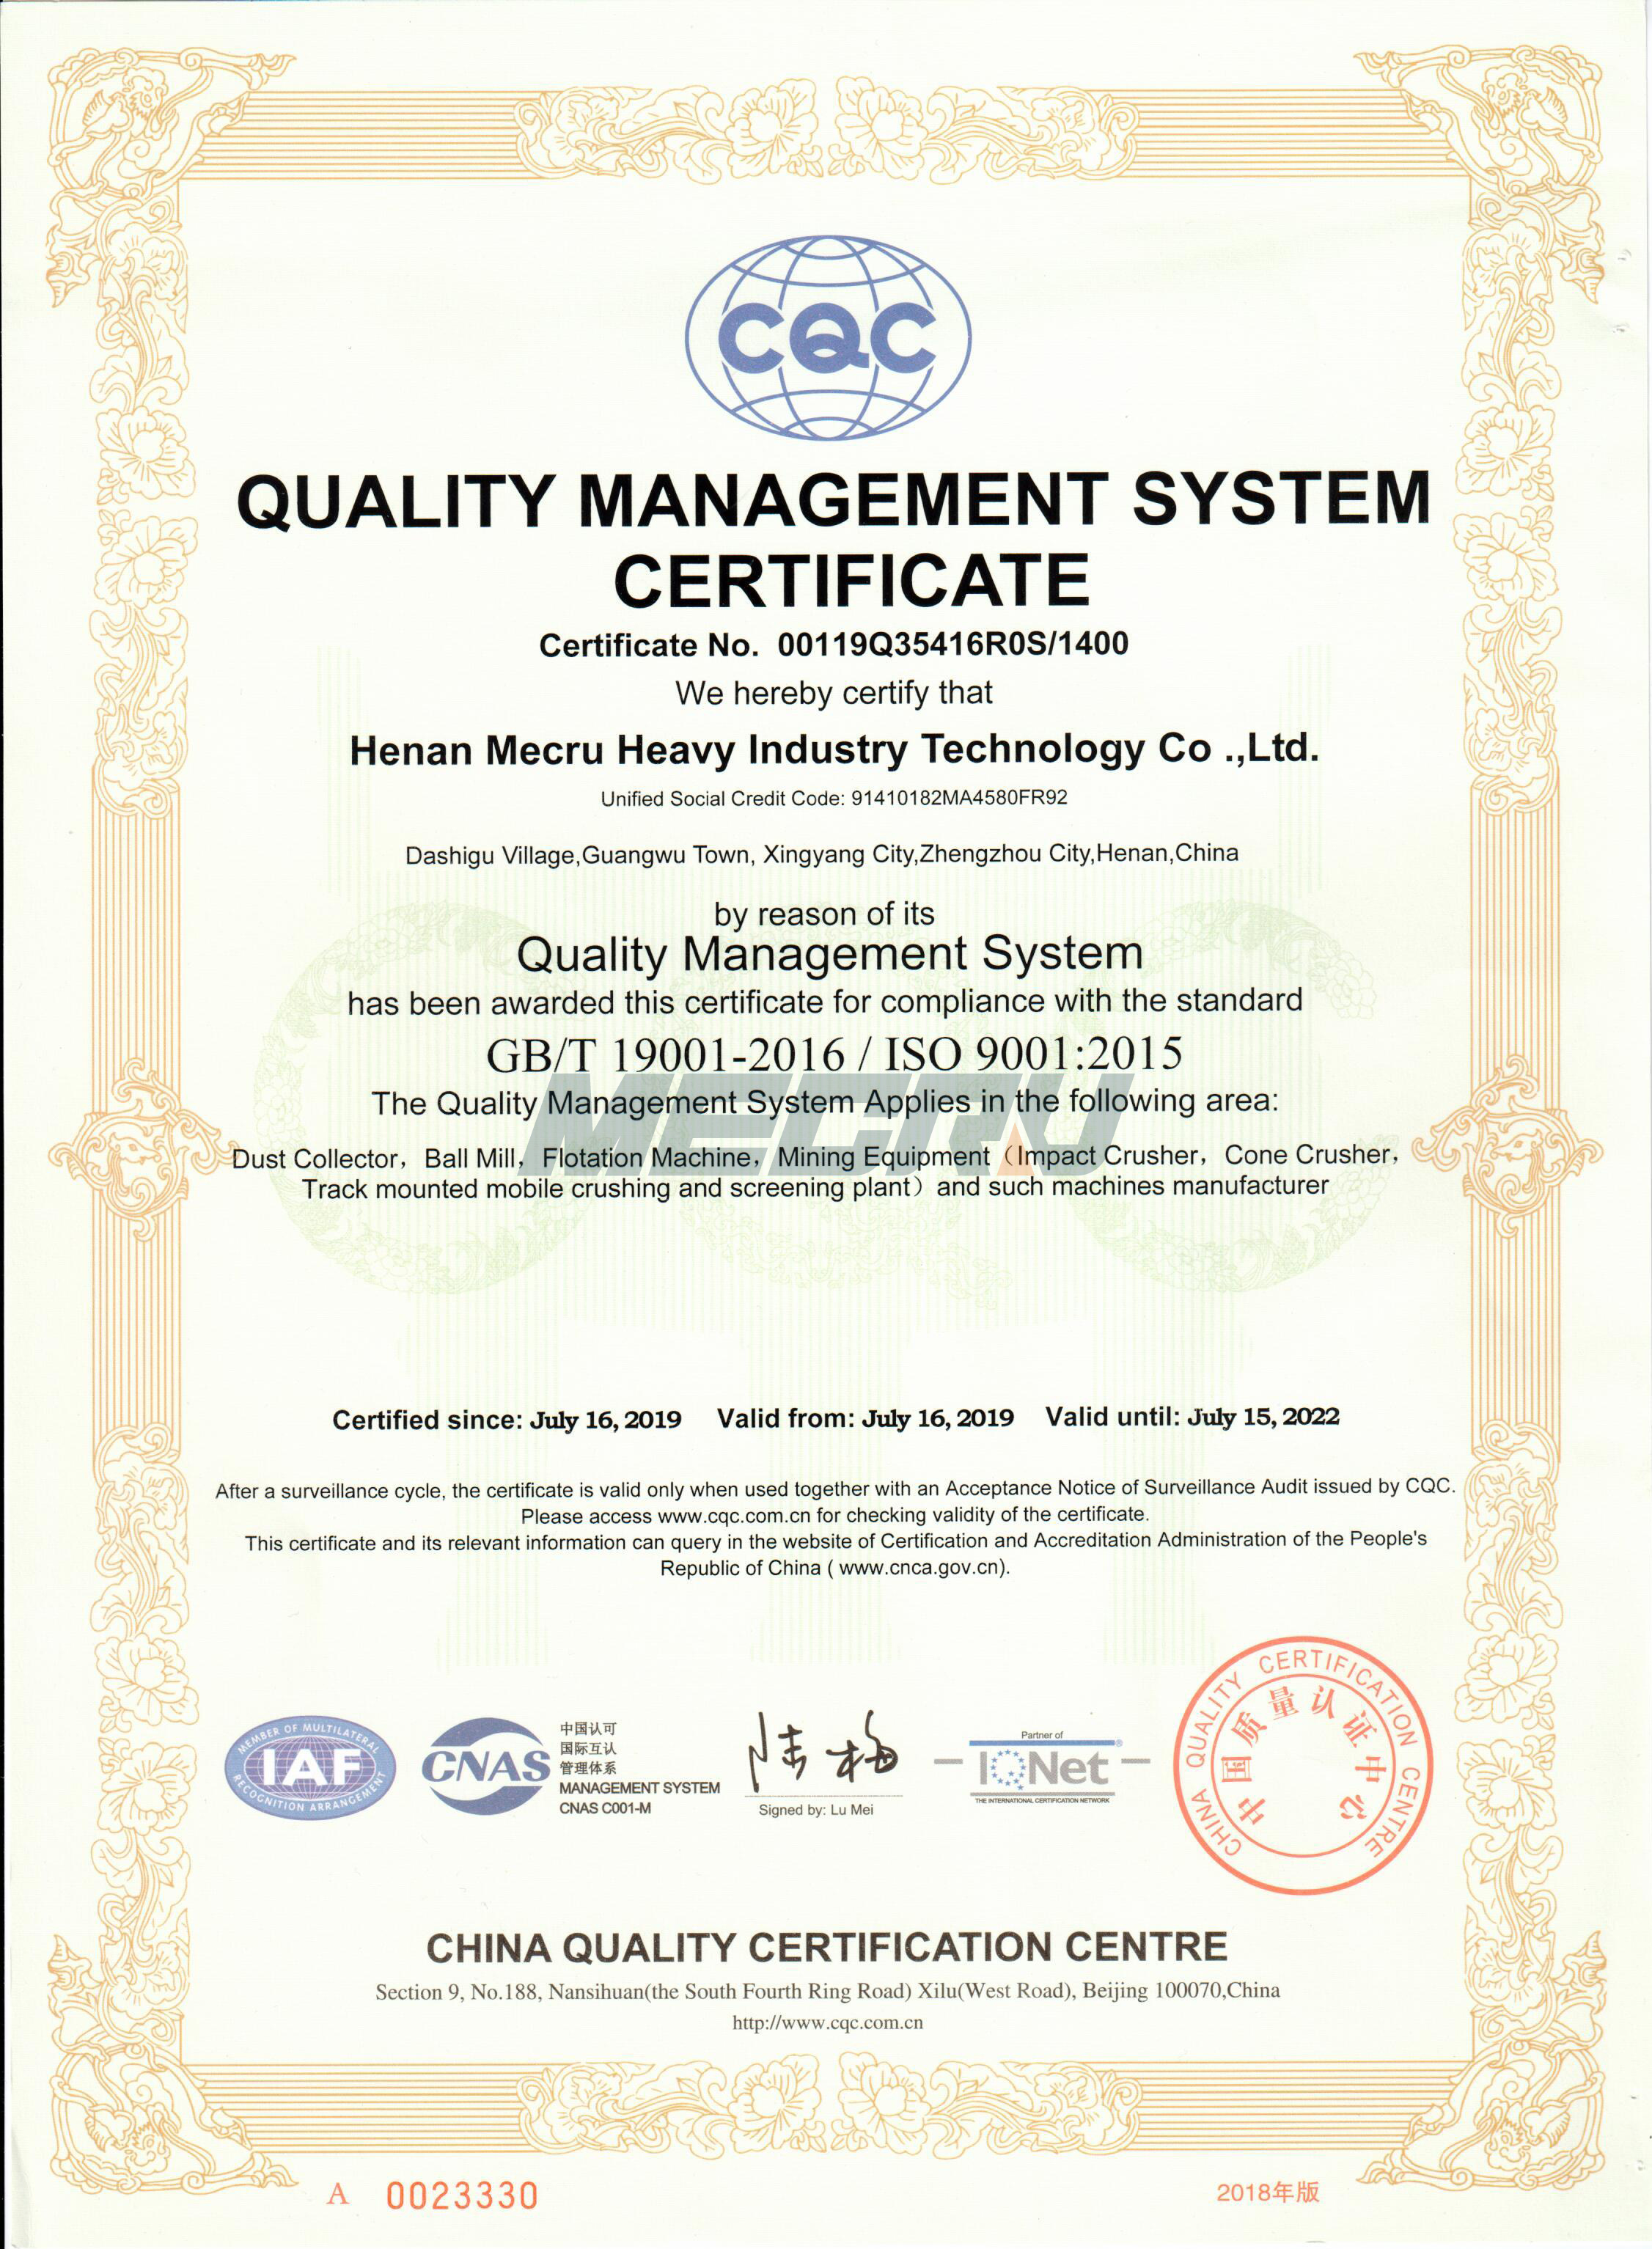 Quality management system certification (2)